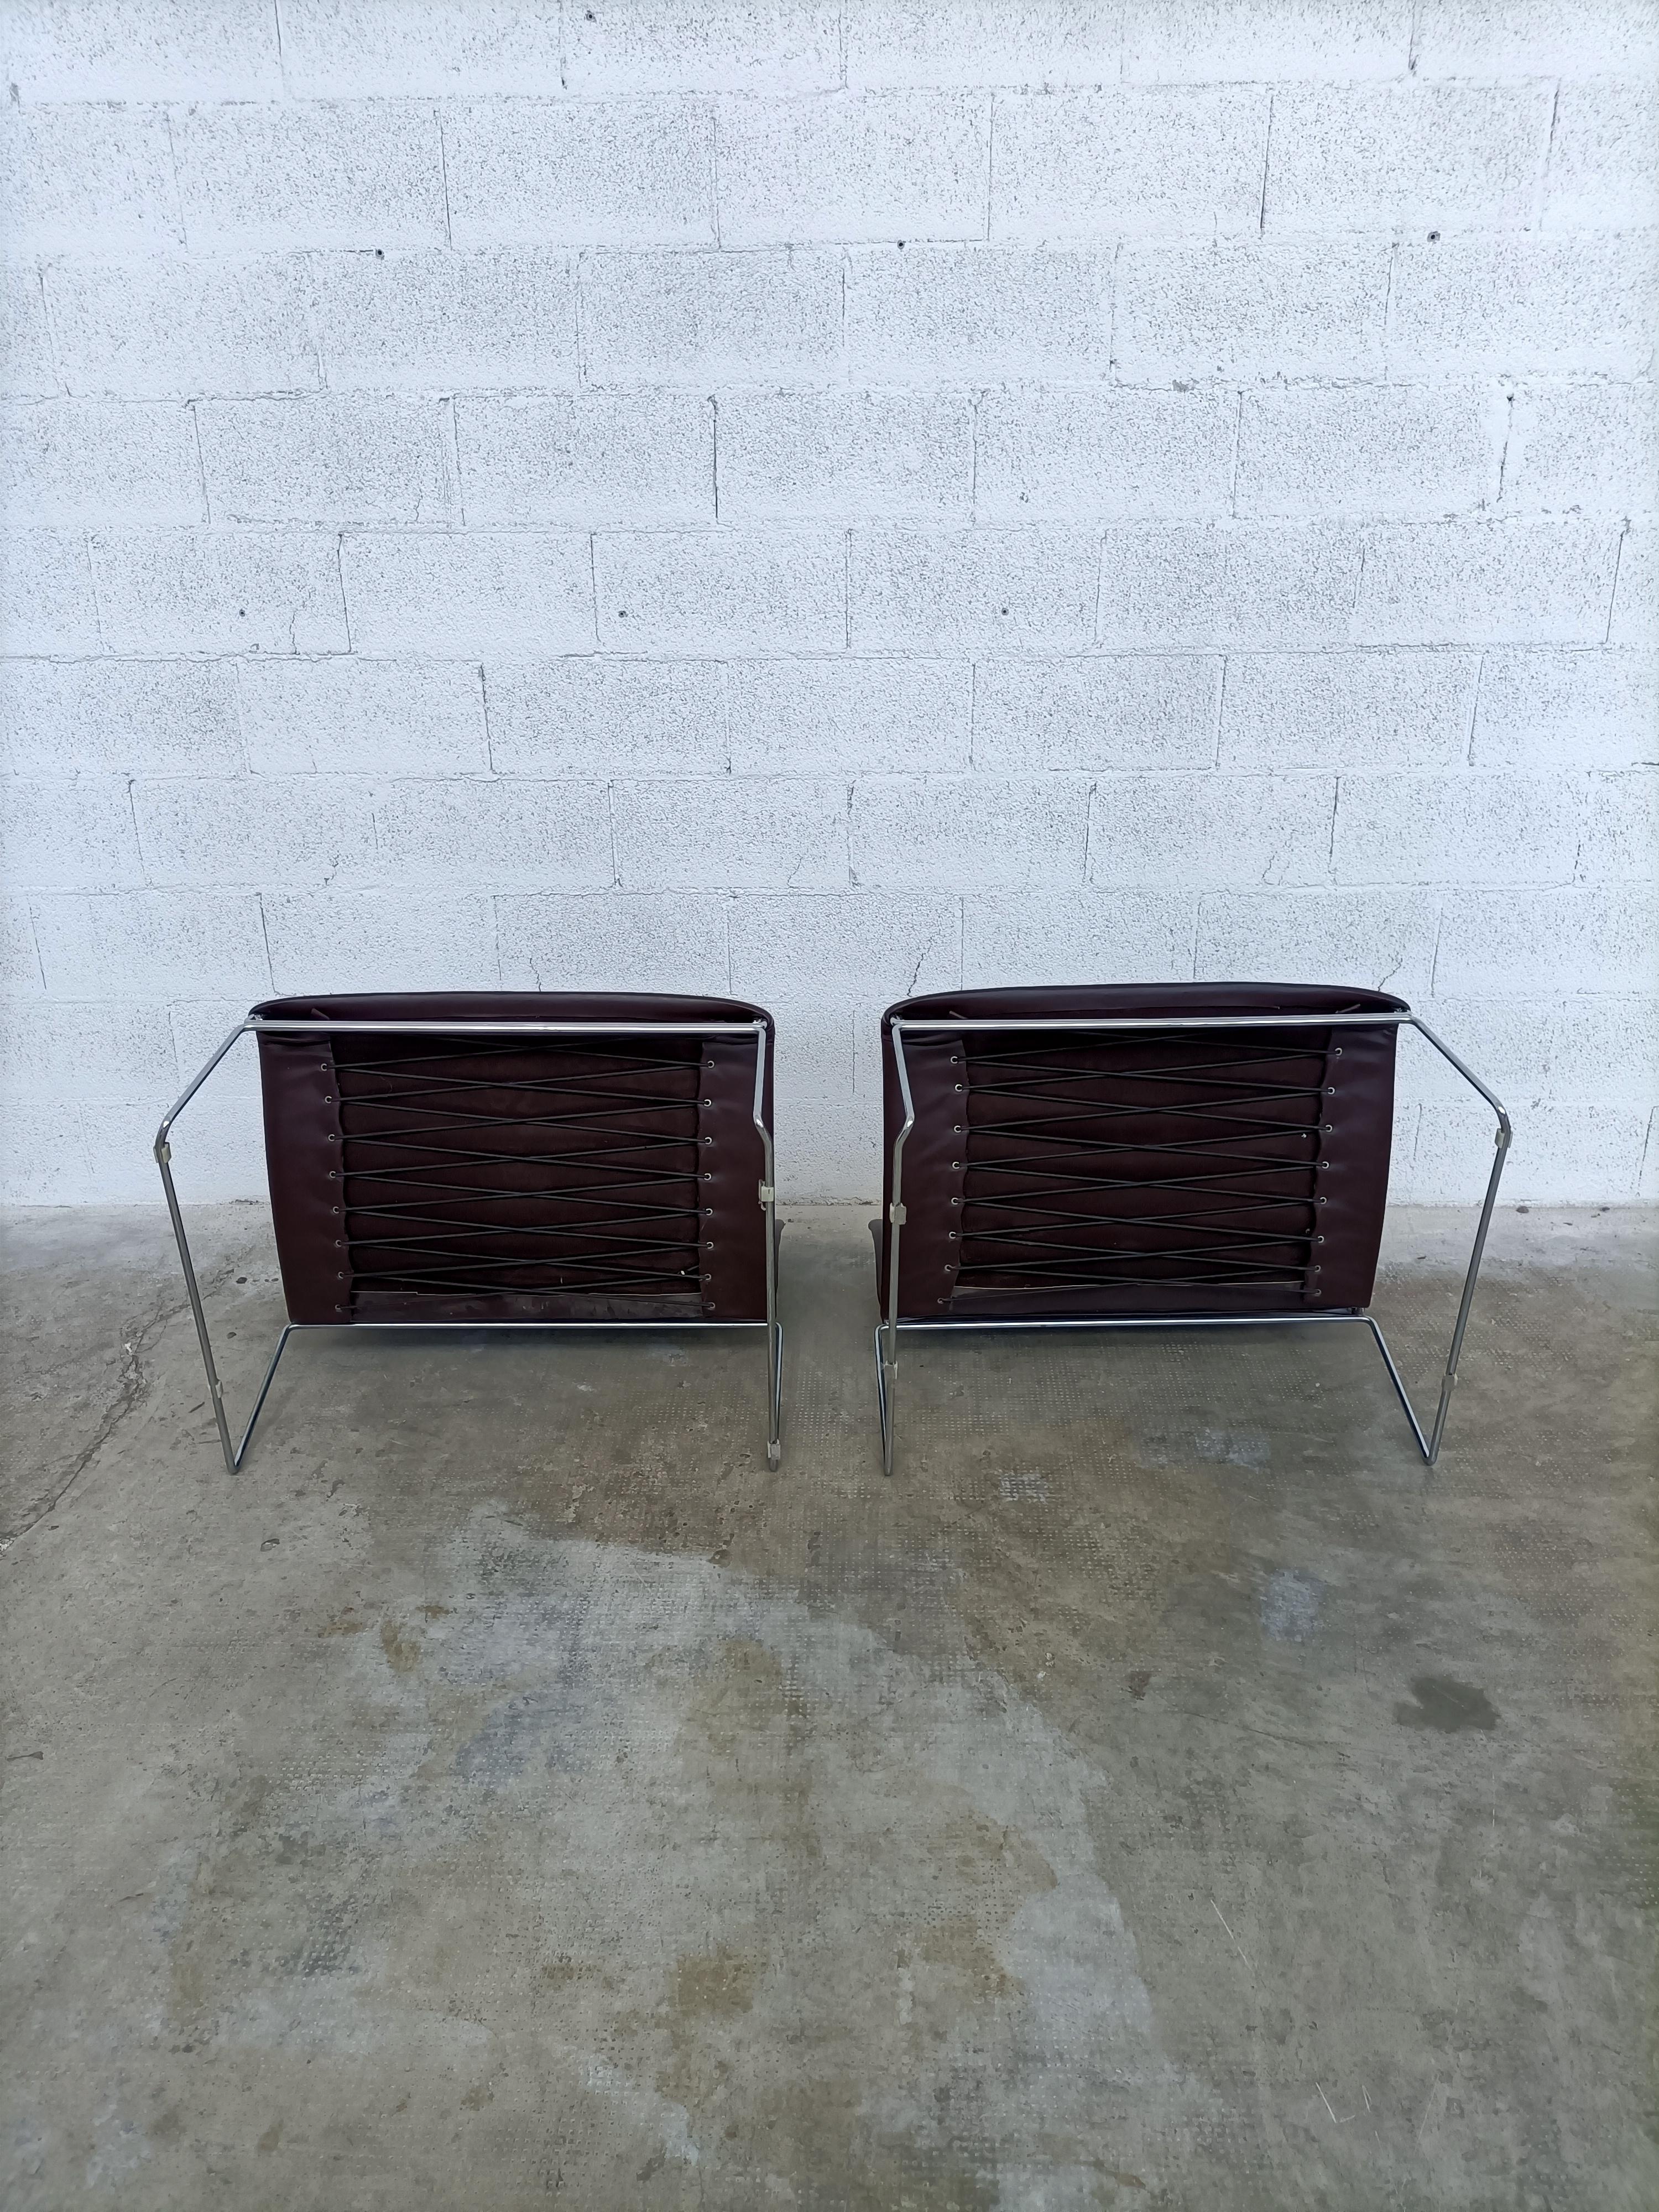 Set of 2;Saghi lounge chairs designed by Kazuhide Takahama for Simon Gavina in 1970s. 
The frames are made of solid bent steel chromed, upholstered in brown faux leather.
The 